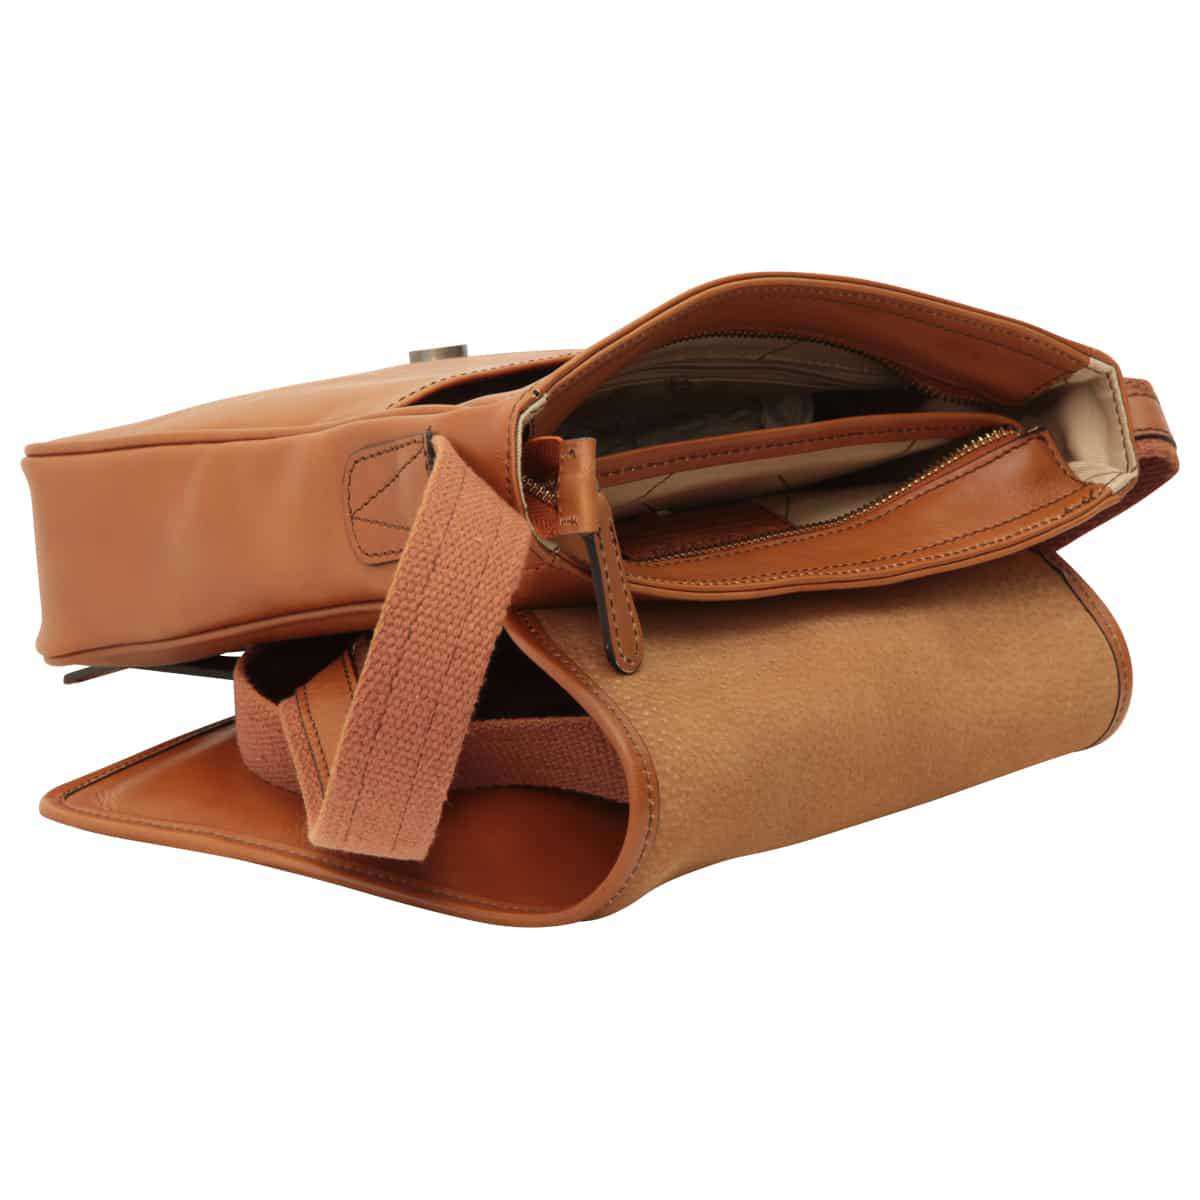 Small leather bag with magnetic closure - Brown Colonial | 406689CO | EURO | Old Angler Firenze